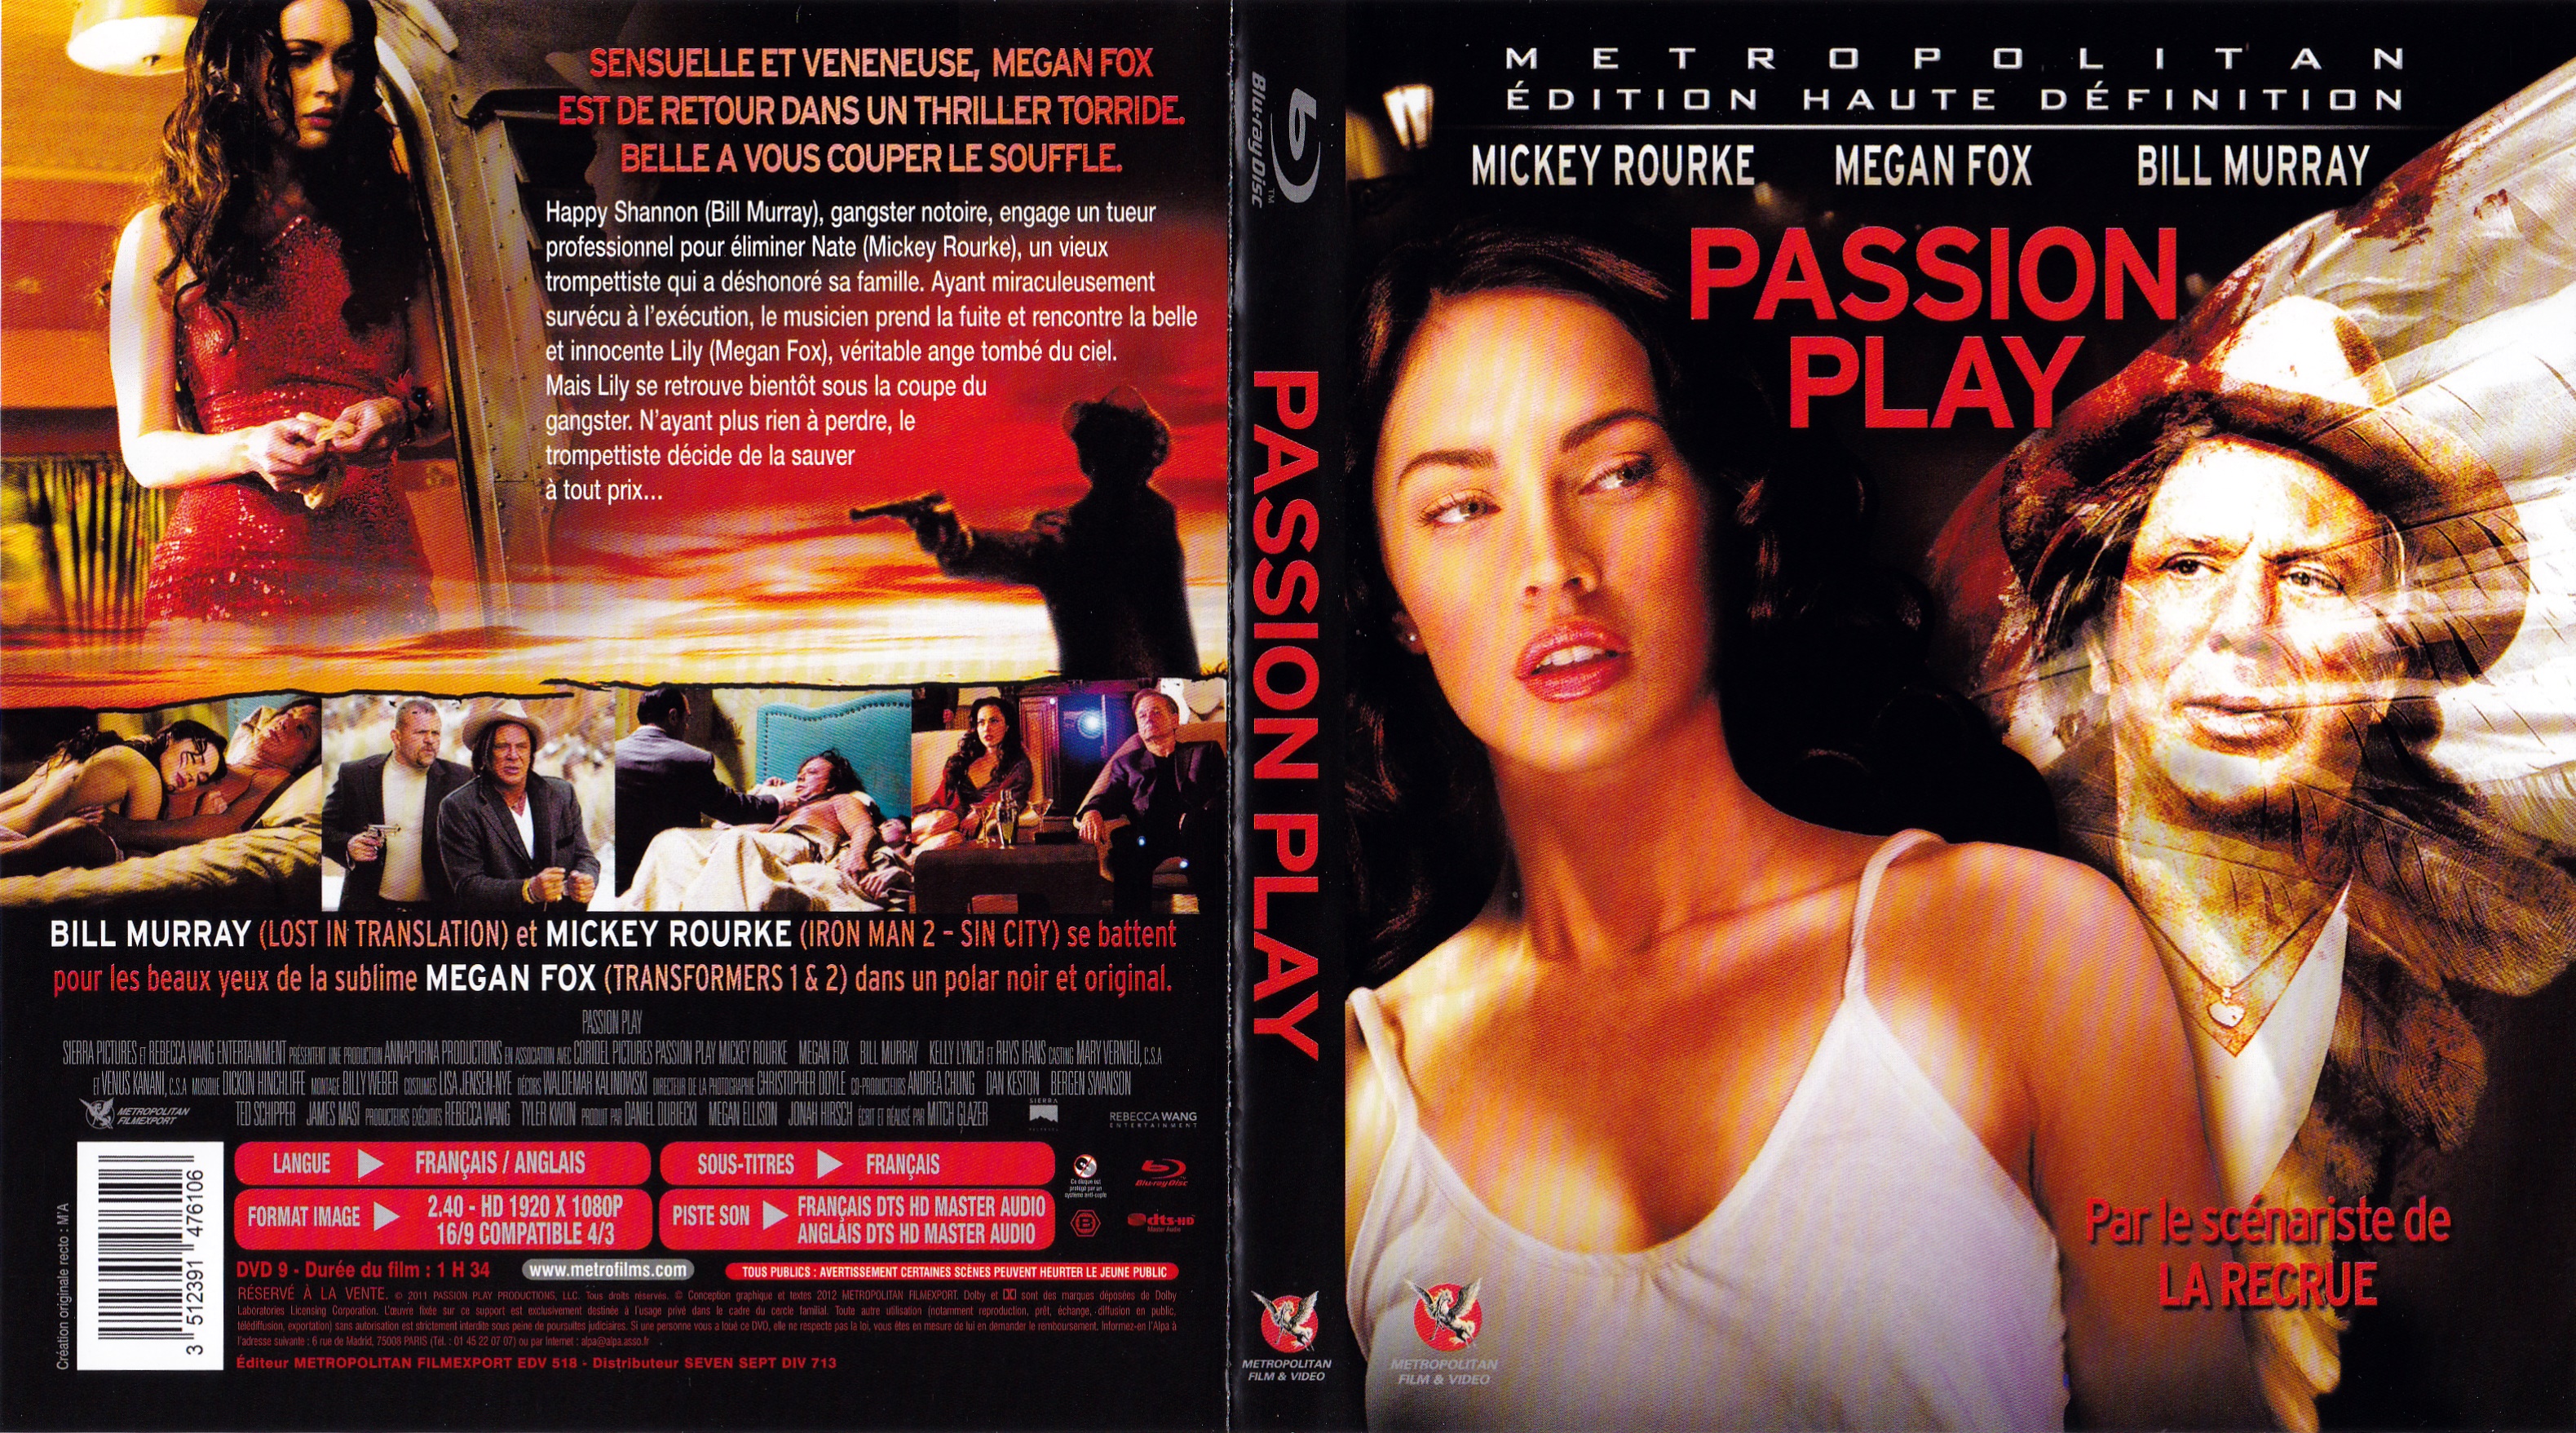 Jaquette DVD Passion play (BLU-RAY)